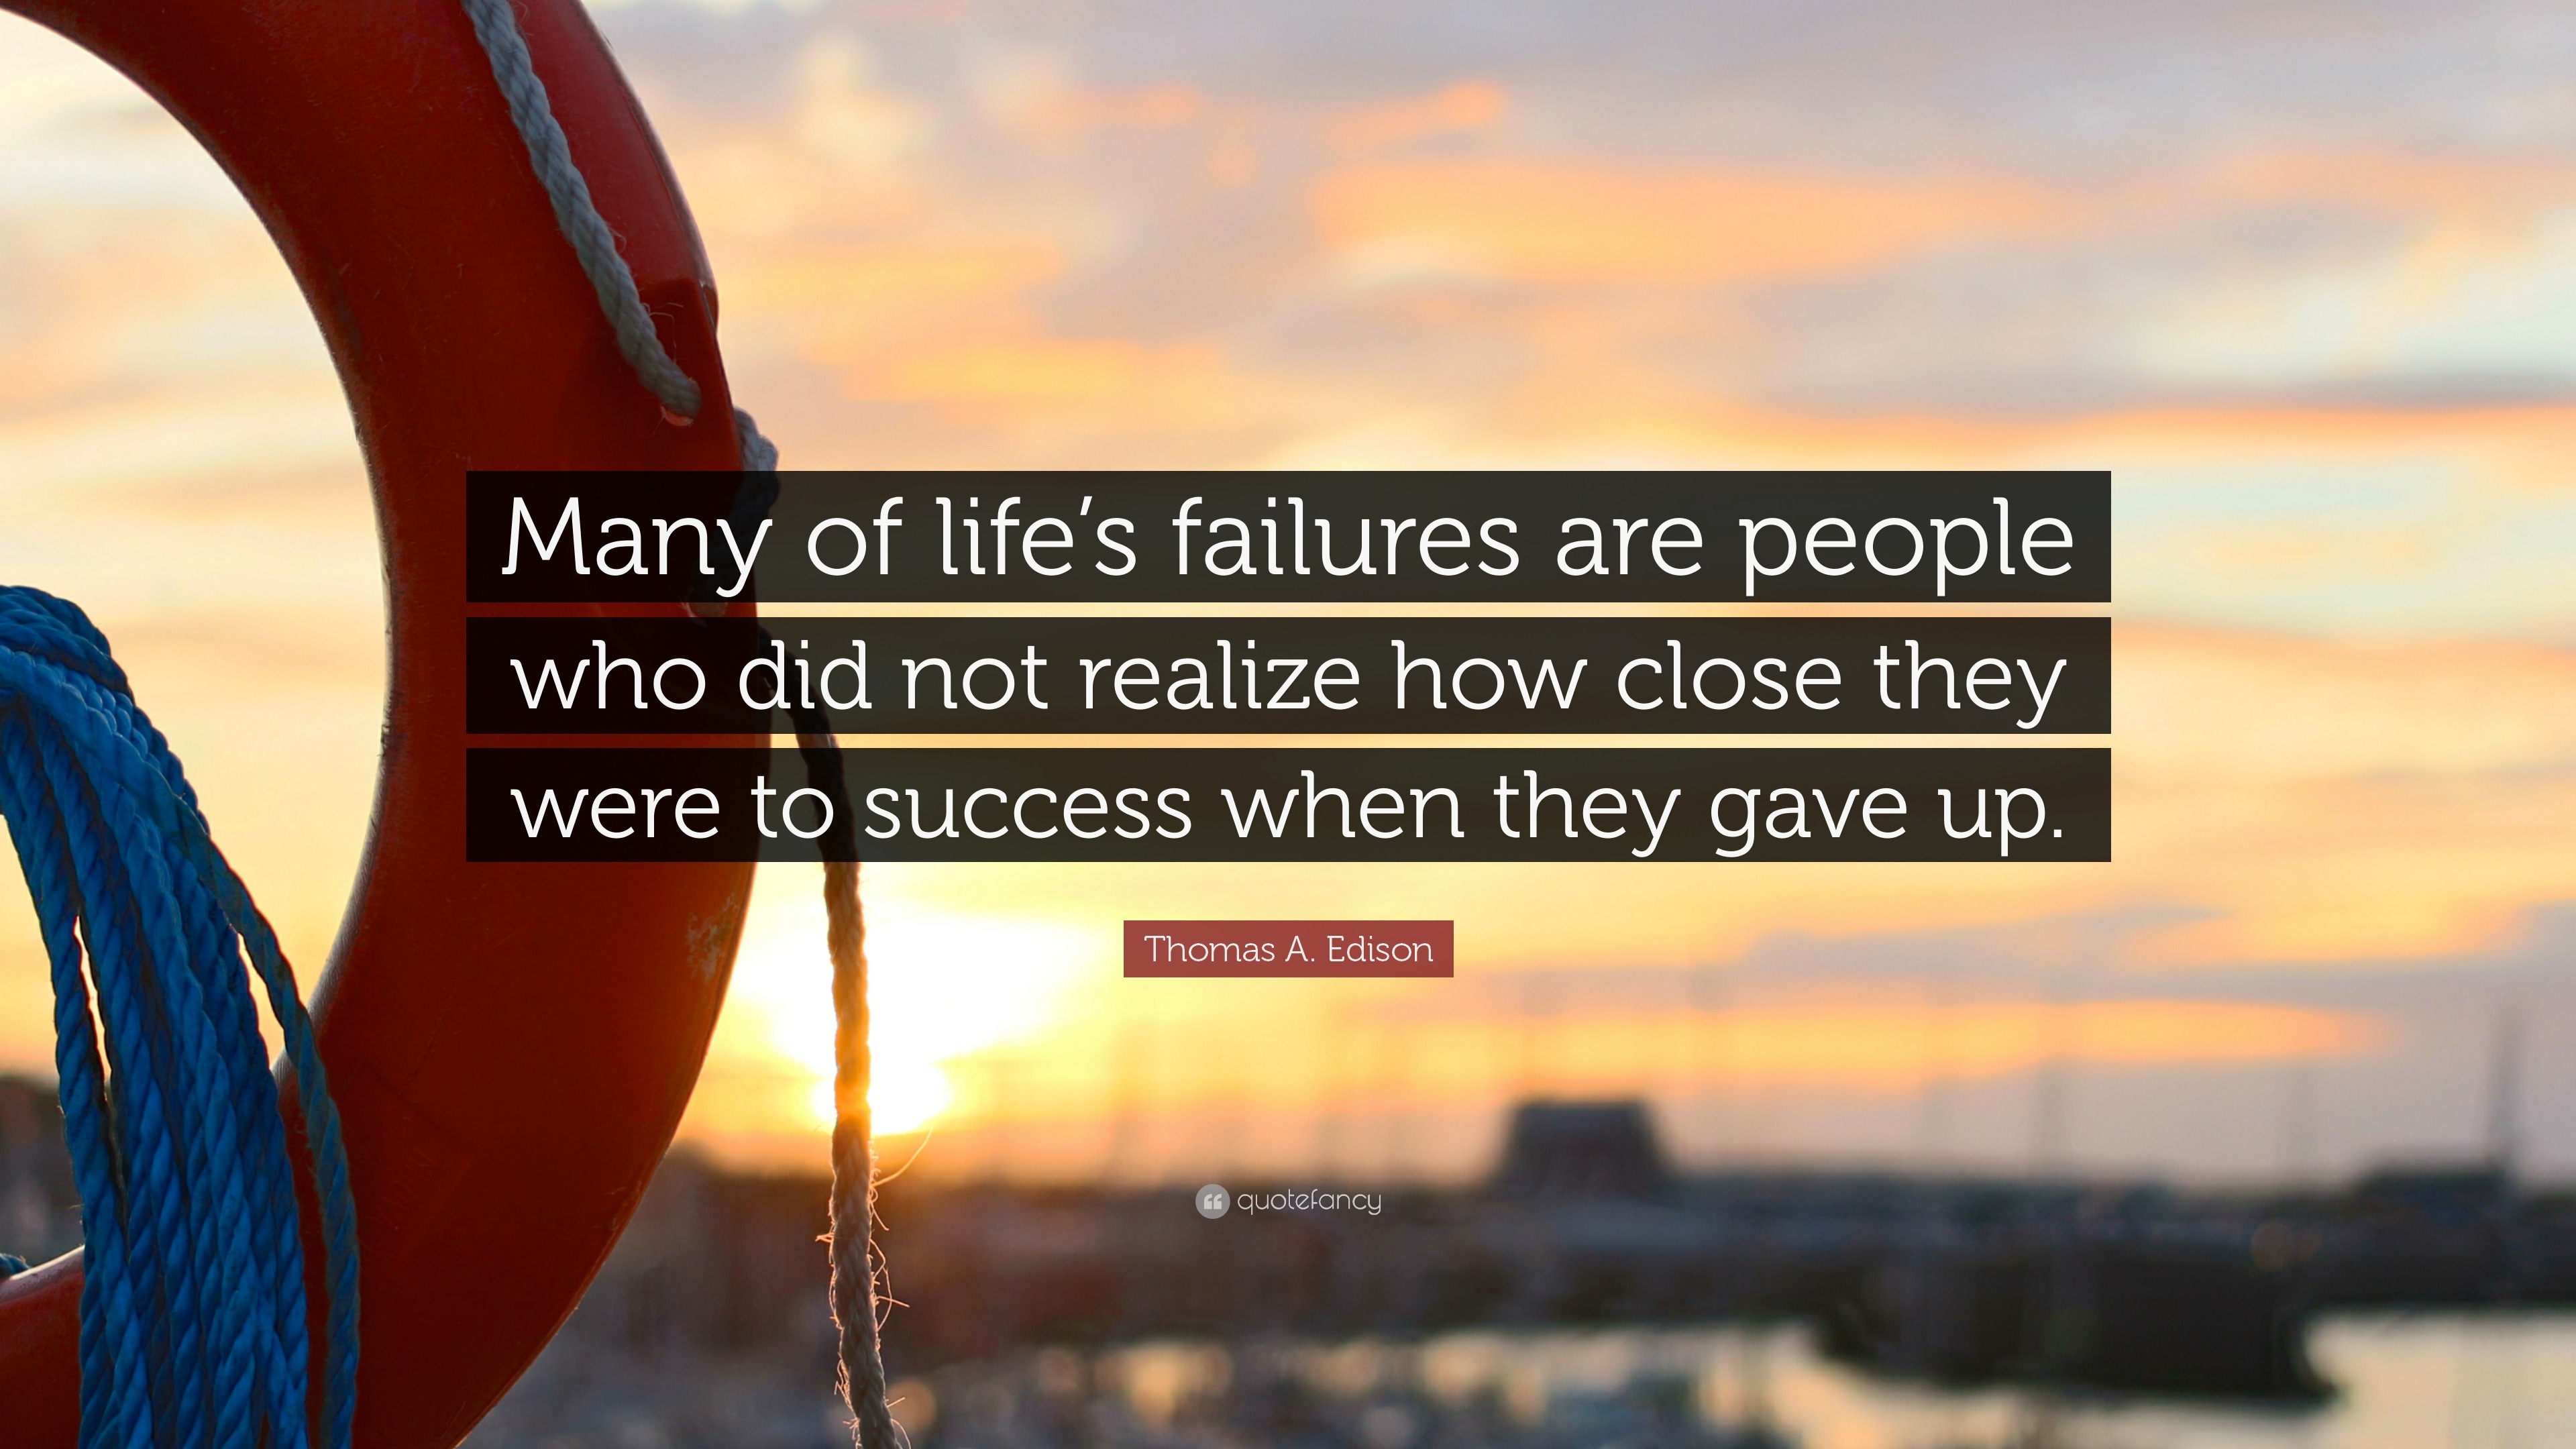 Success Quotes “Many of life s failures are people who did not realize how close